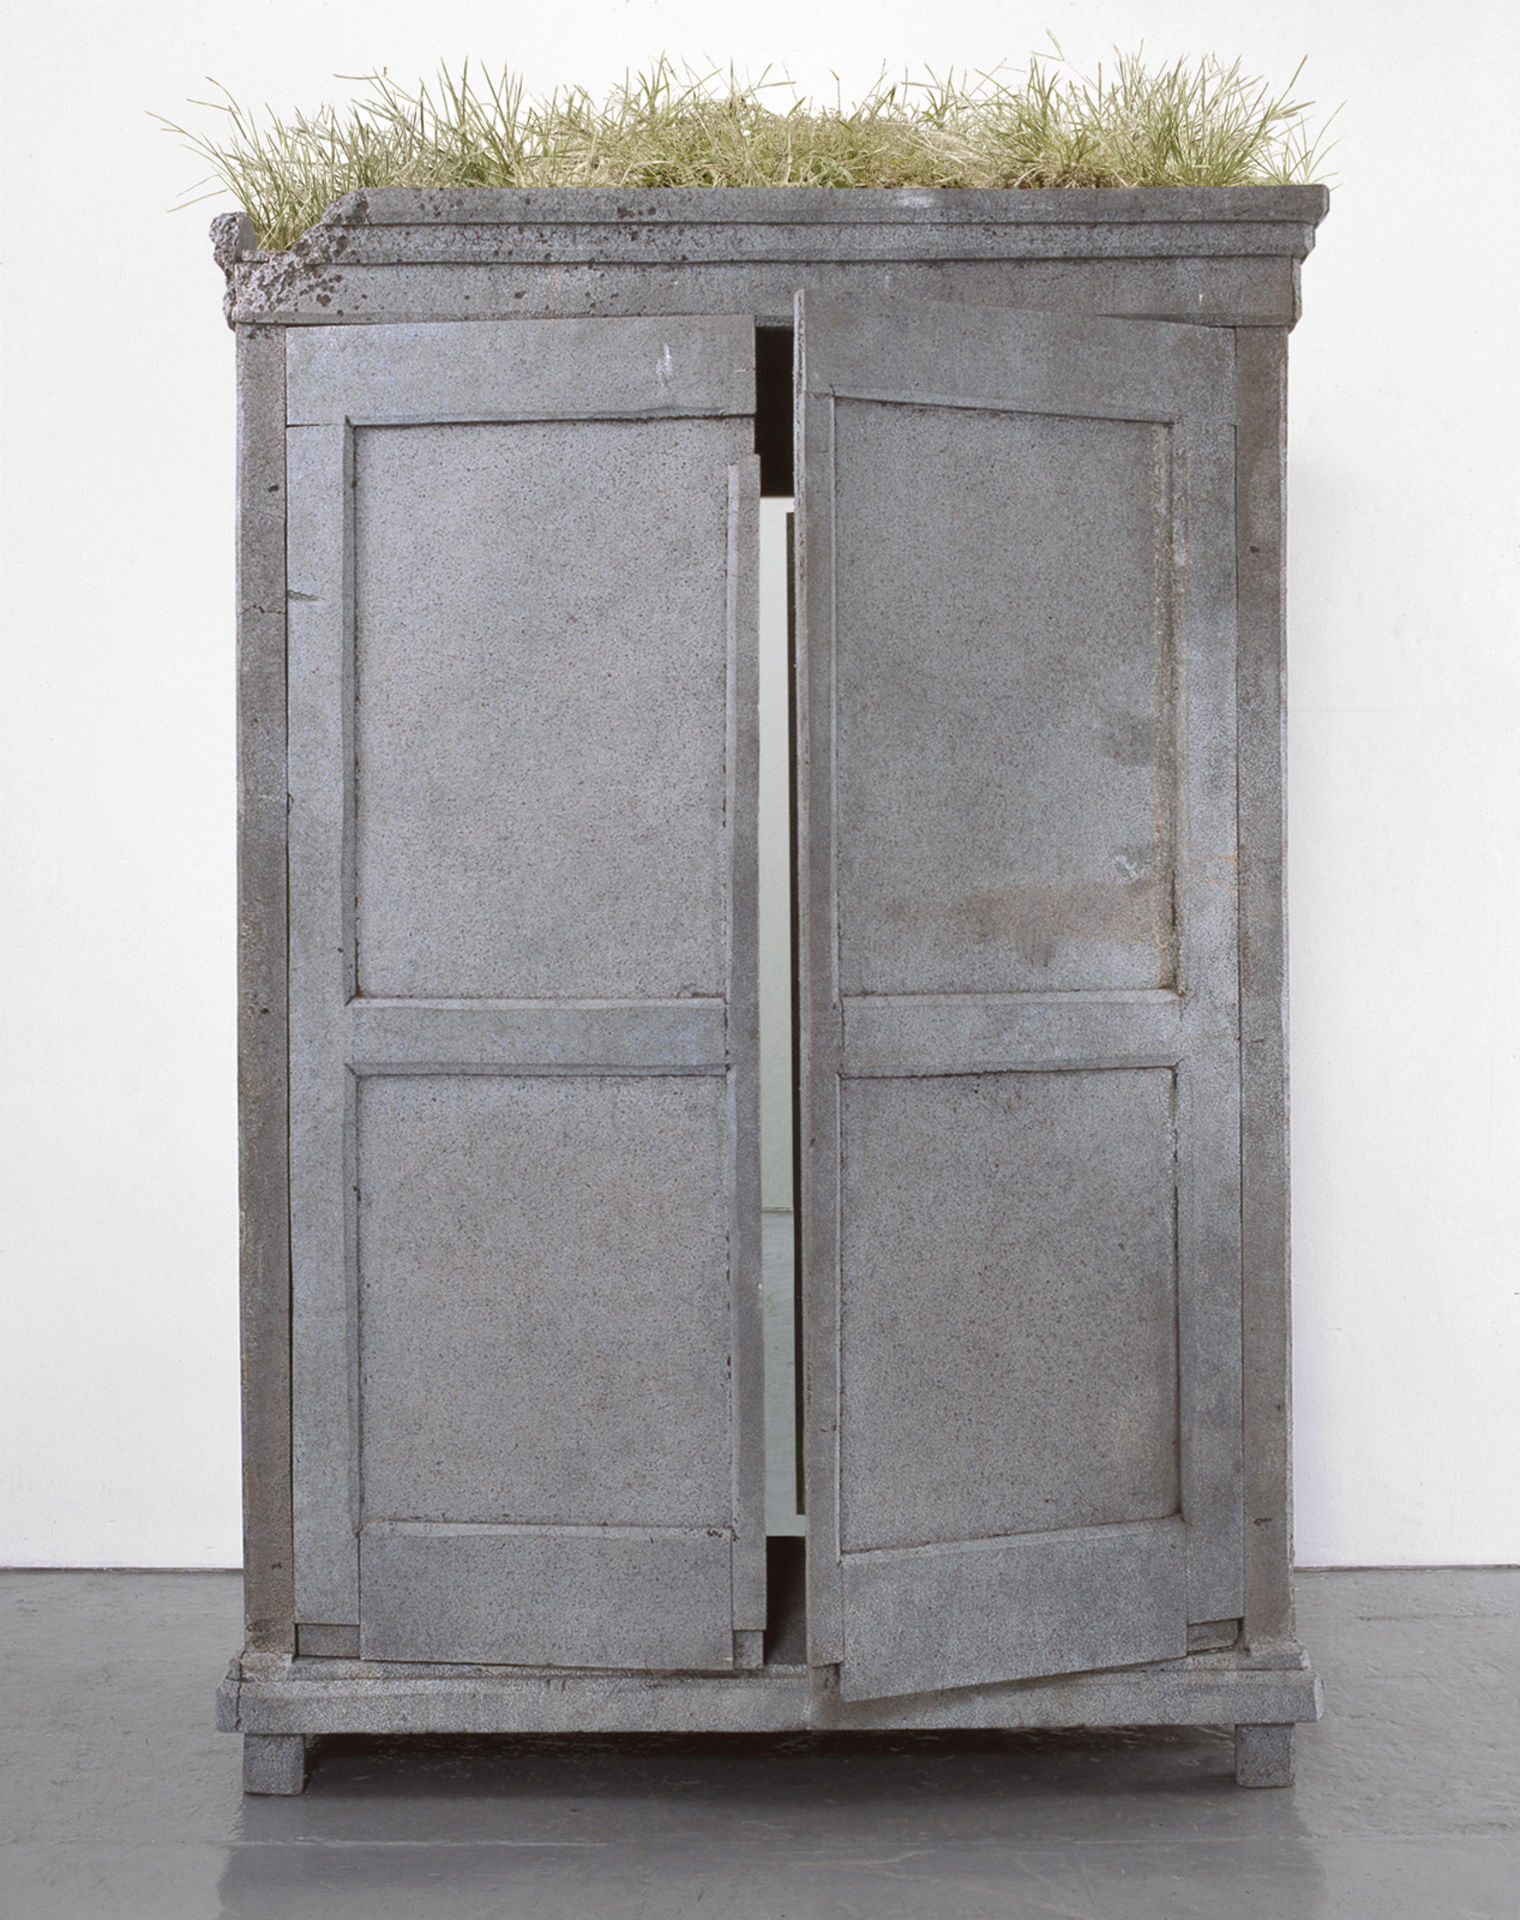 Untitled (Cabinet)